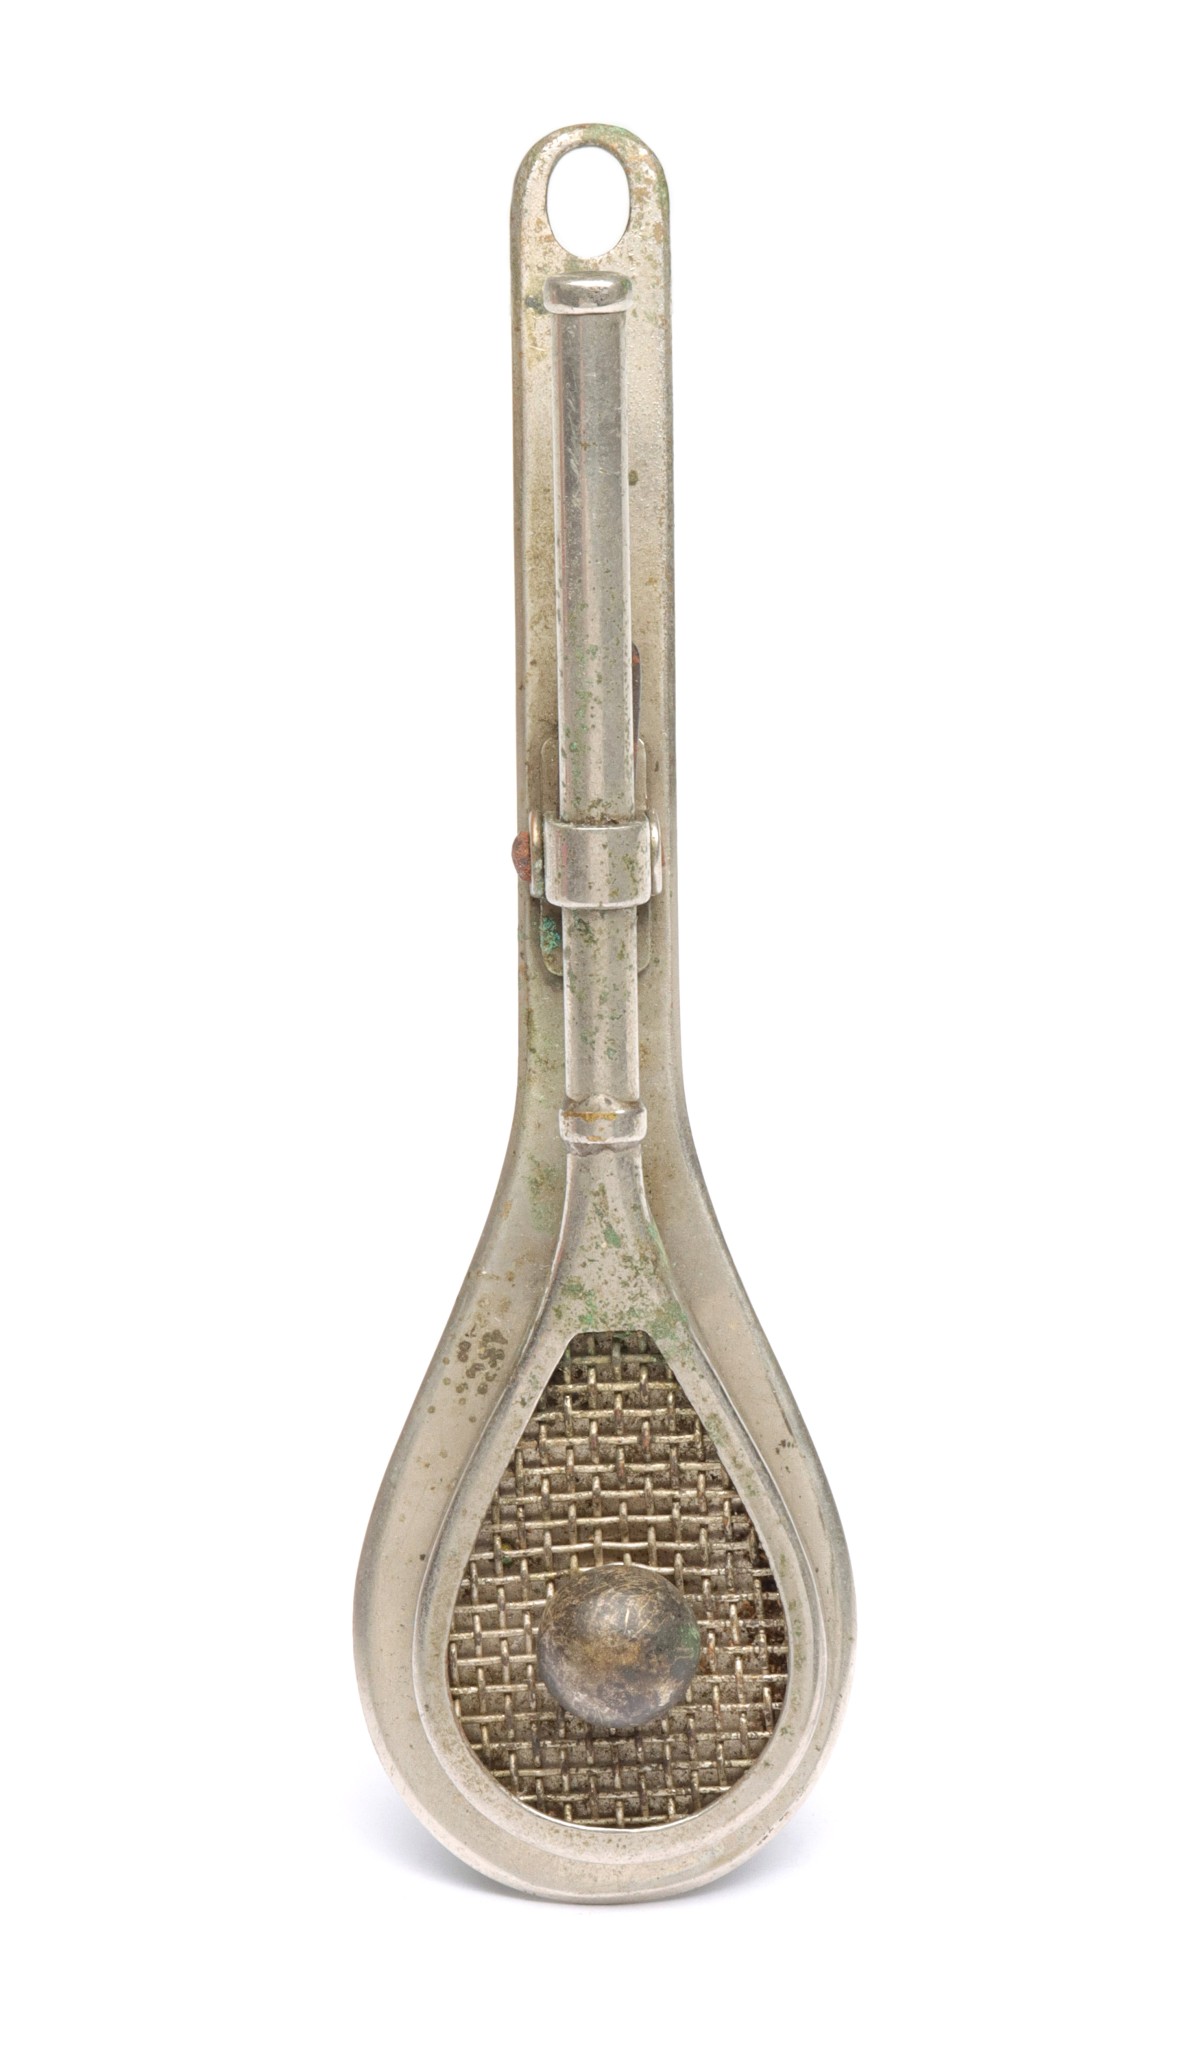 EARLY TENNIS RACKET FIGURAL LETTER CLIP 1880-1910